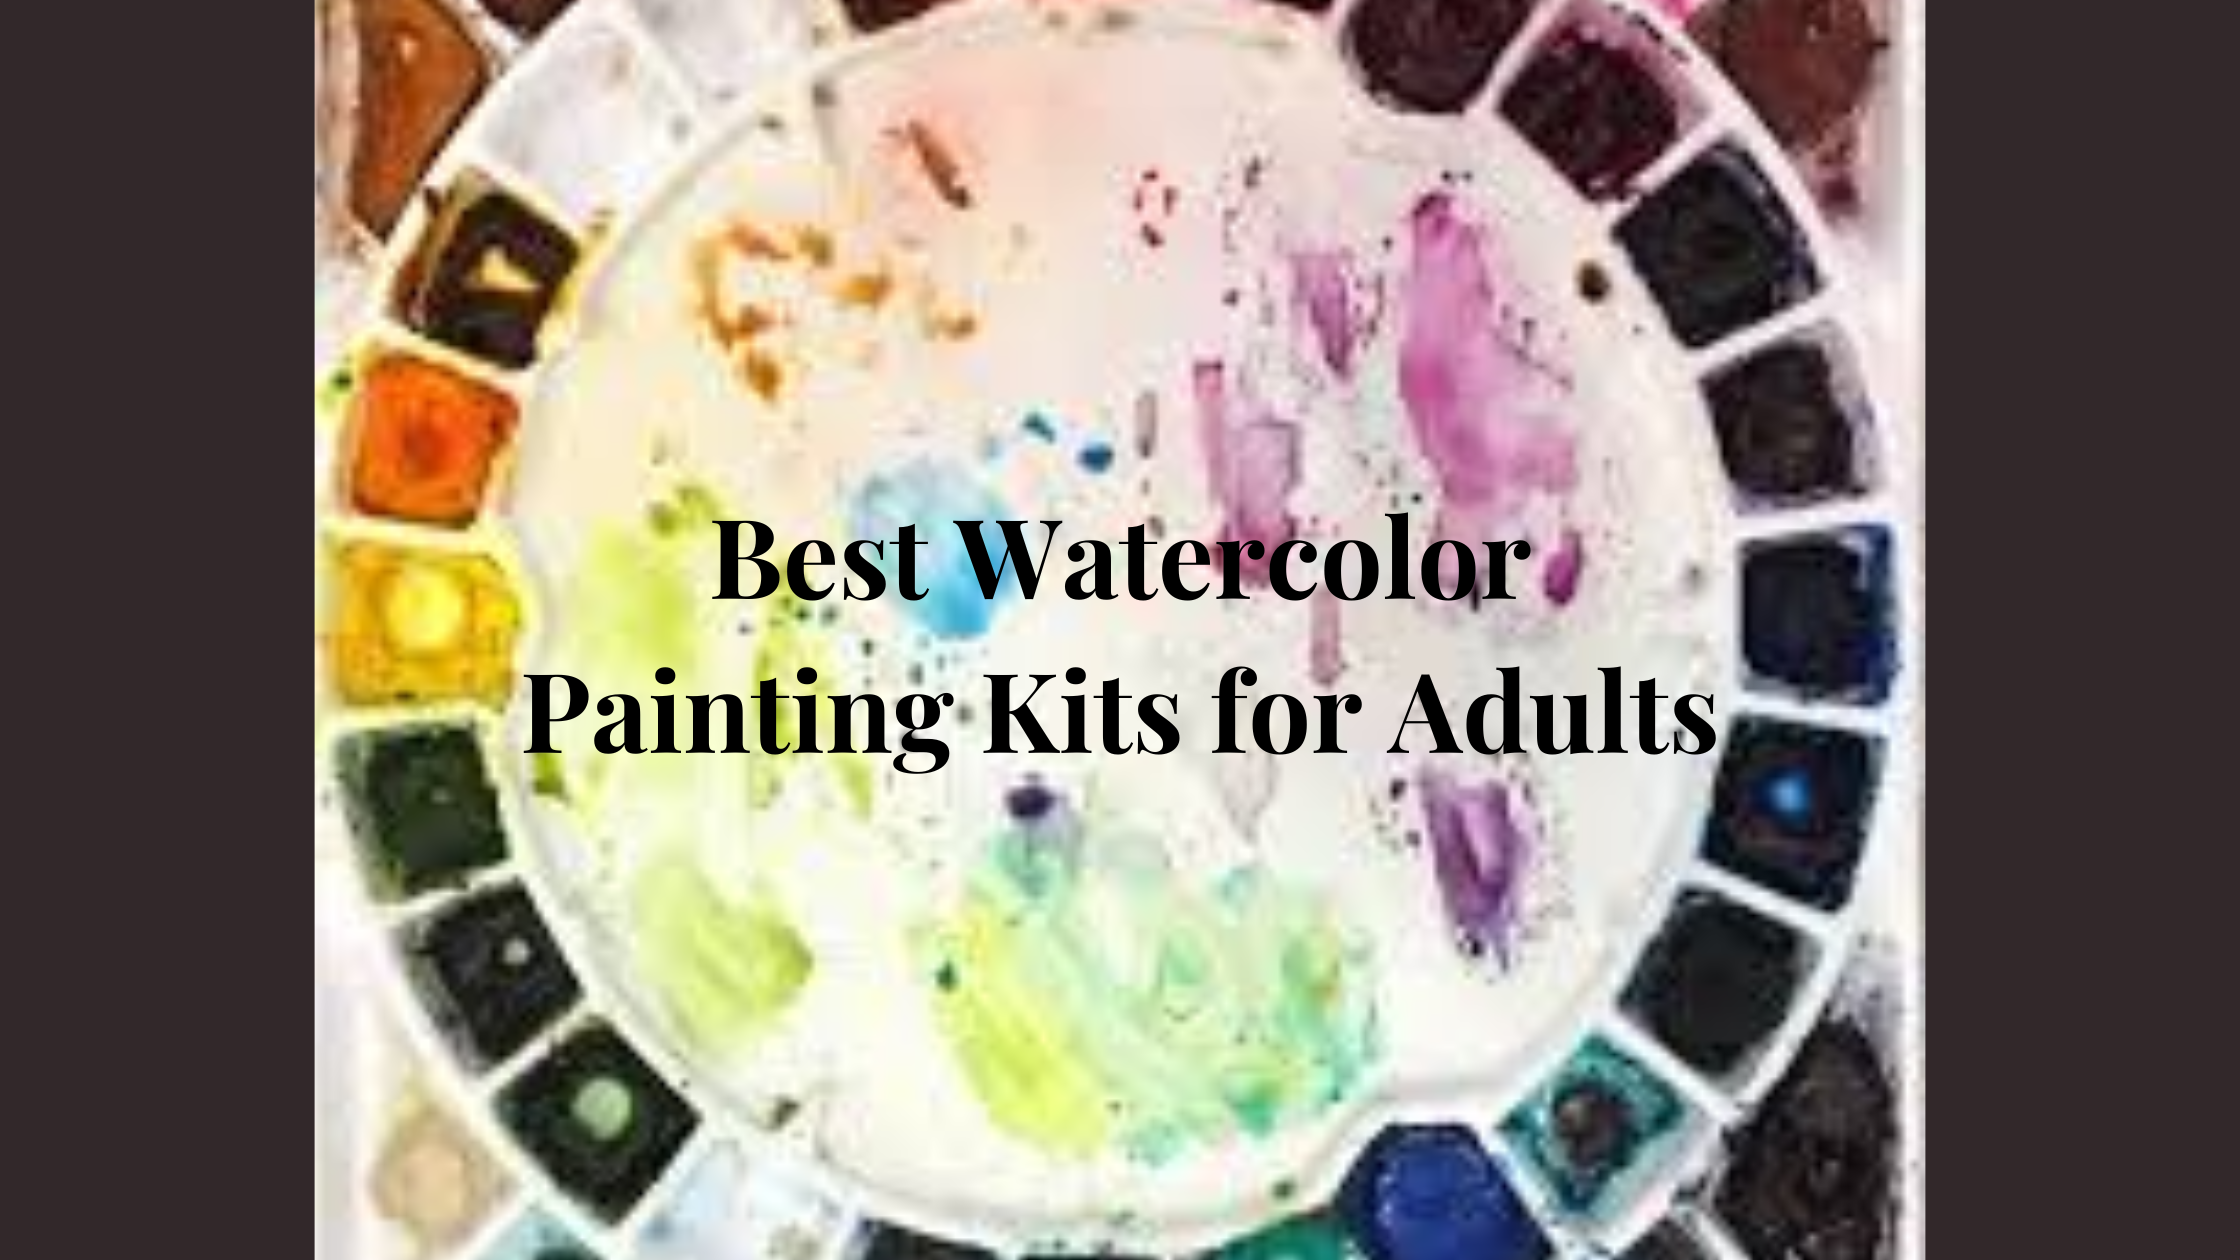 Best Watercolor Painting Kits for Adults